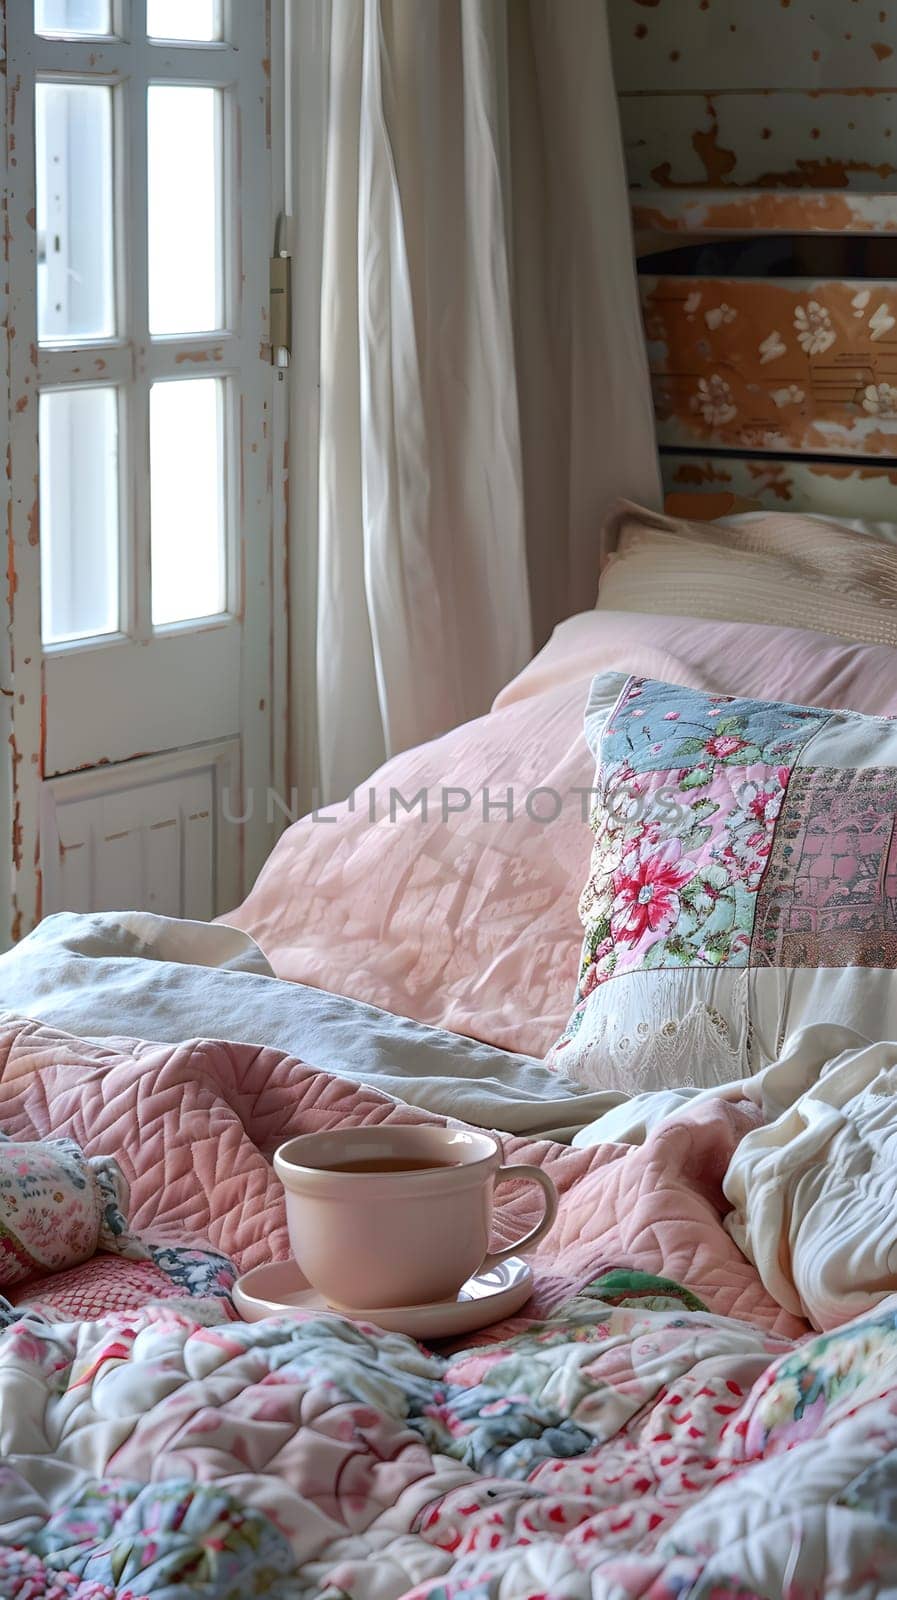 A cozy room with a hardwood floor, a window with a curtain, and a bed made with soft linens and a quilt. A cup of coffee adds to the comfort